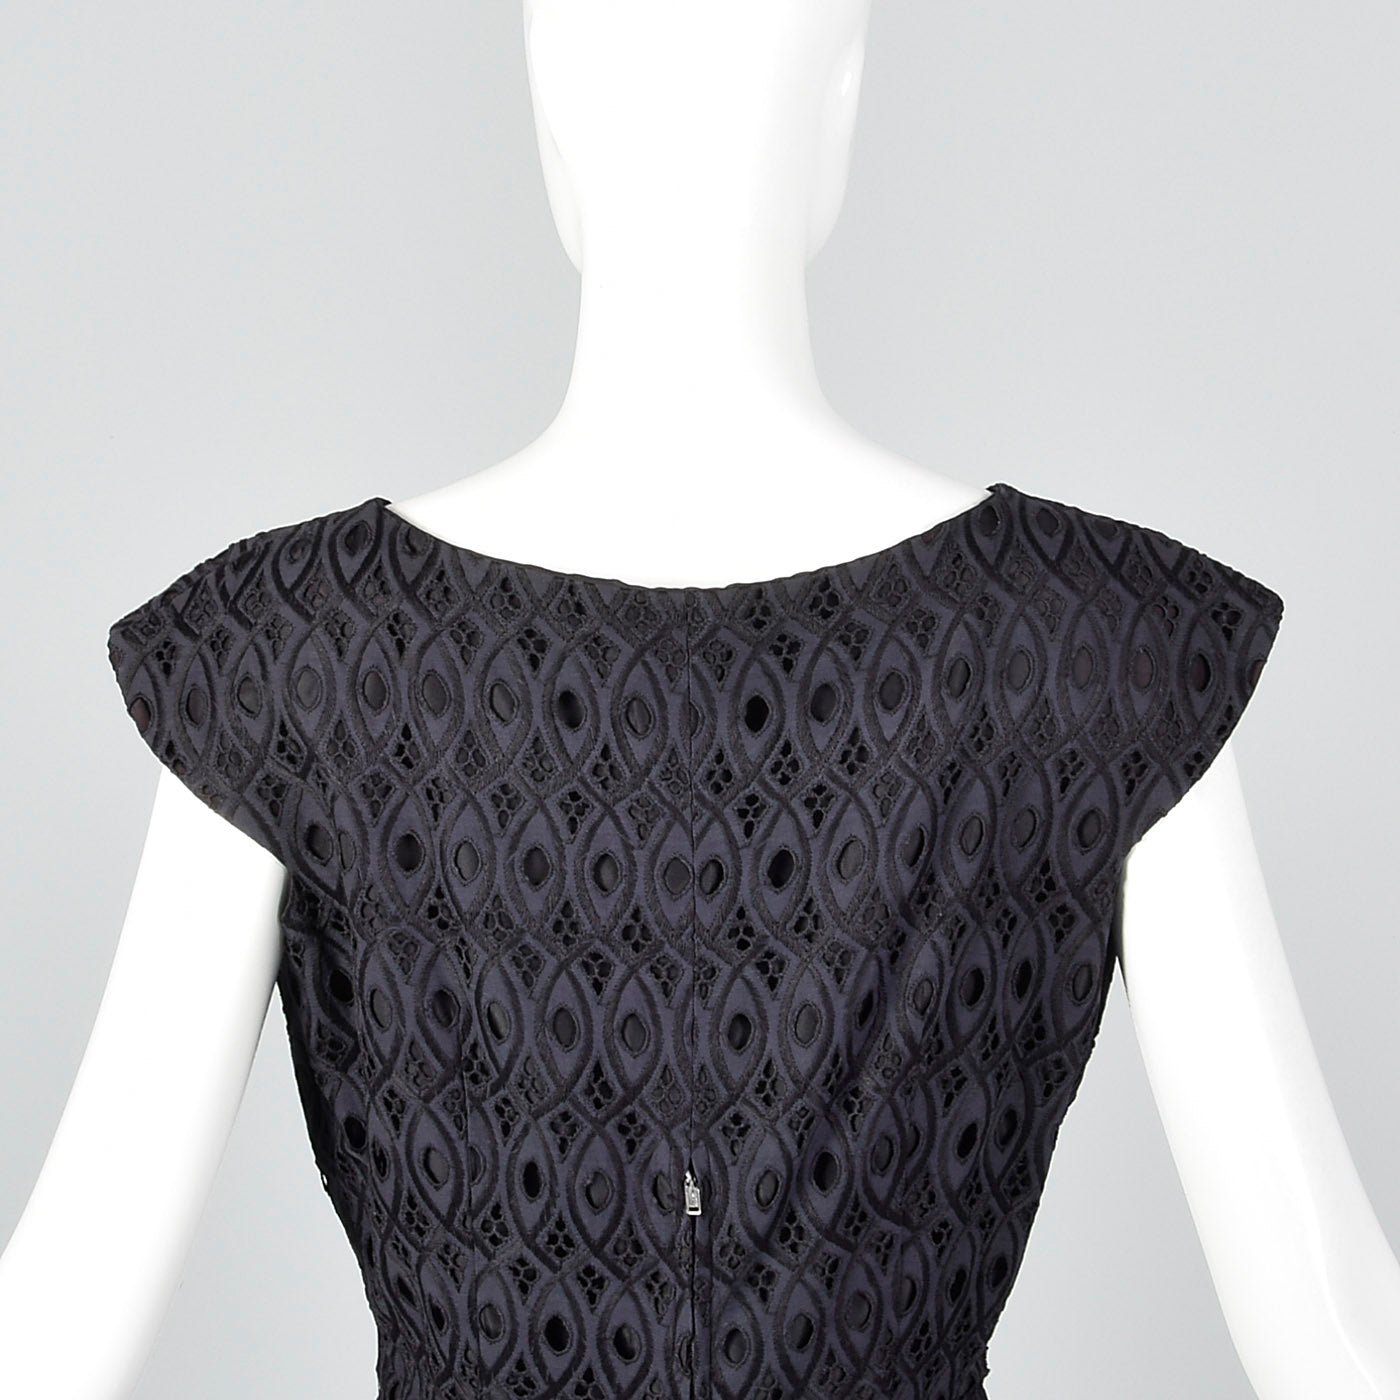 1950s Navy and Black Eyelet Dress with Drop Waist Illusion